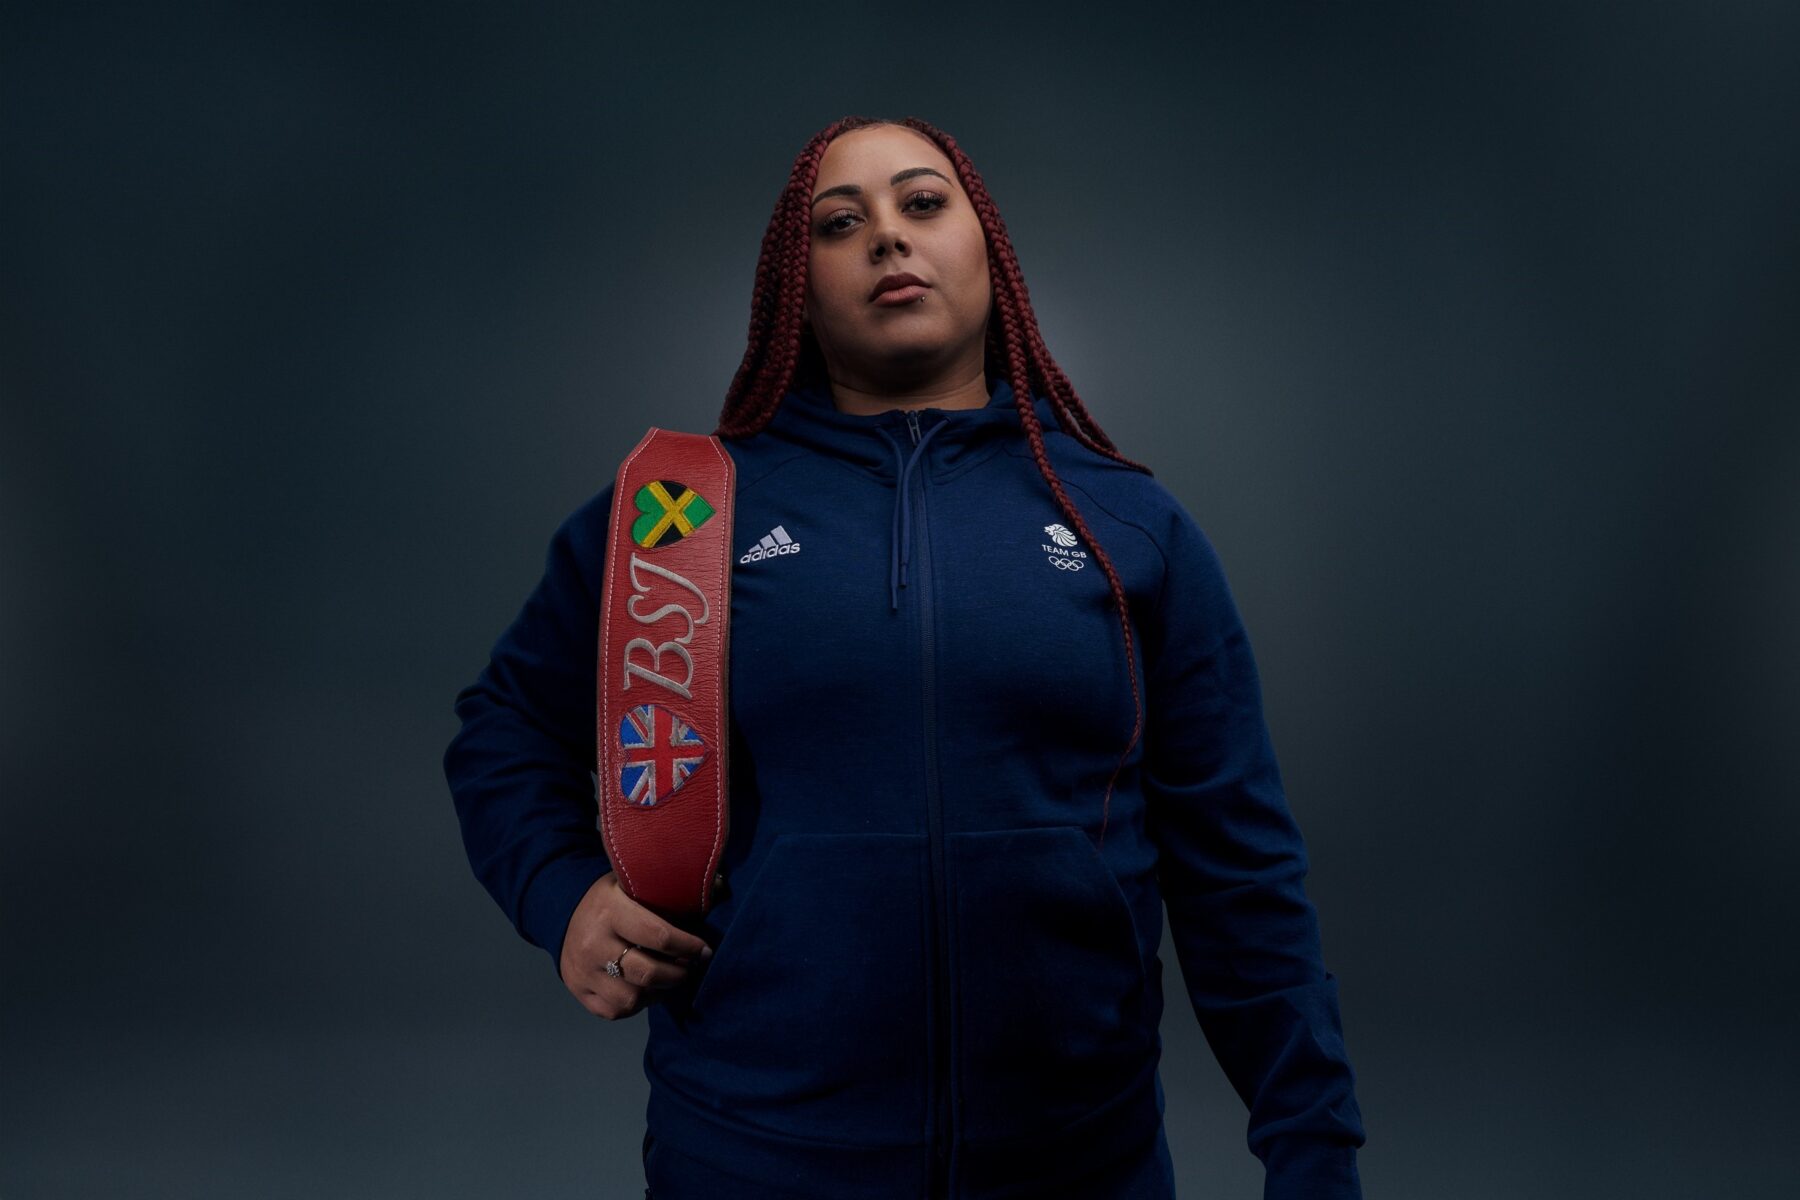 Emily Campbell Team GB weightlifter, pictured with her equipment